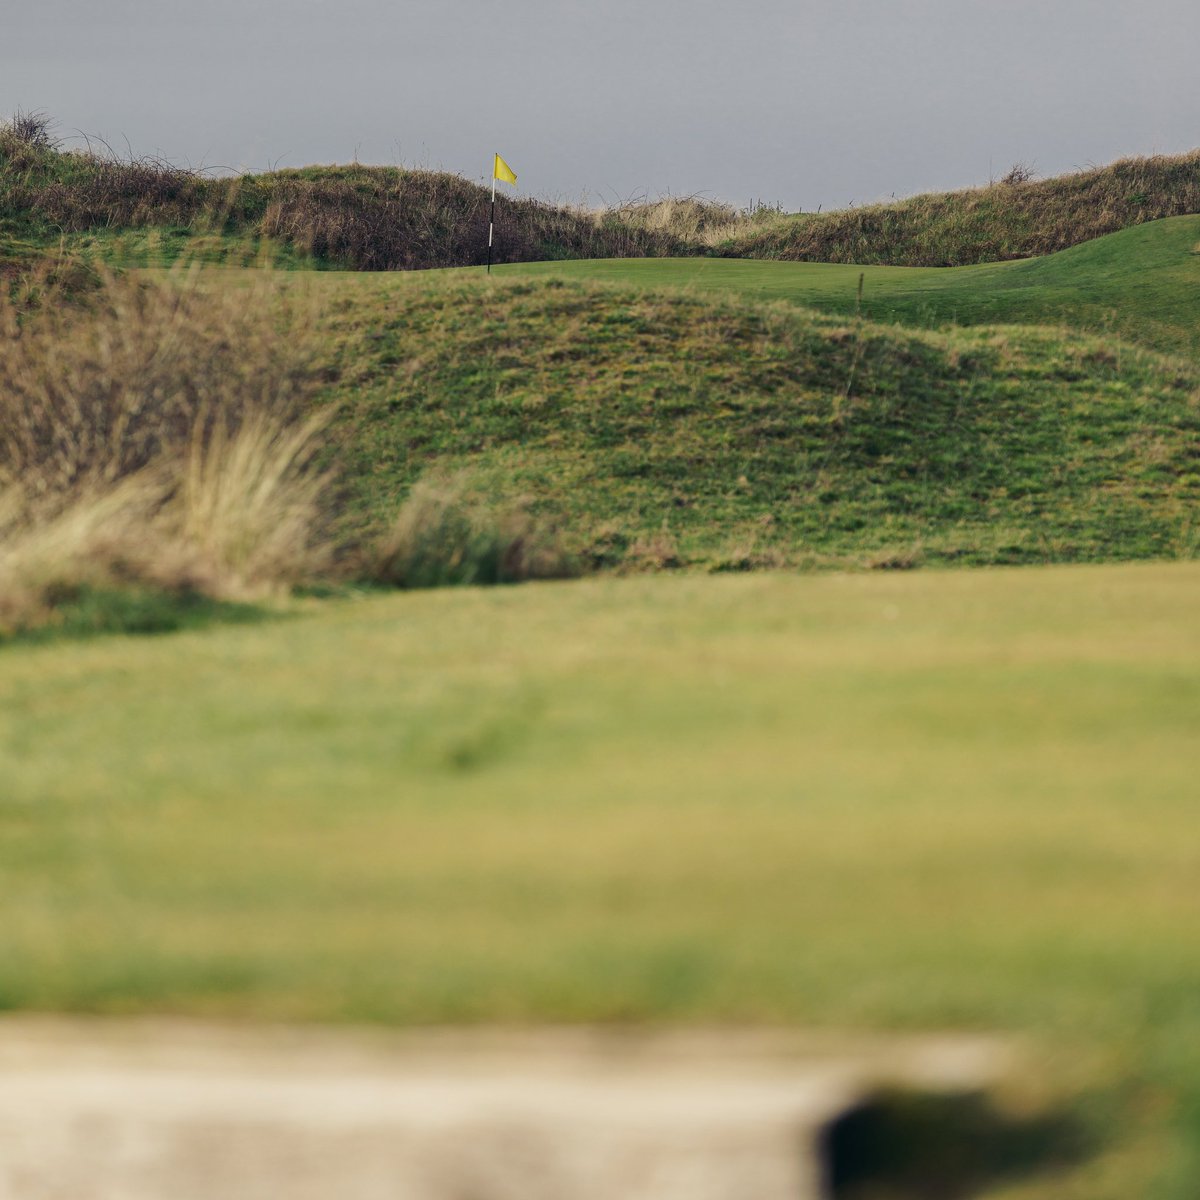 Nothing better than a crisp Monday morning out on the links.👌

#golfcoursearchitecture #golfcoursedesign #linksgolf #golfcourselife #golfcourseview #top100golfcourse #burnhamonsea #somersetlife